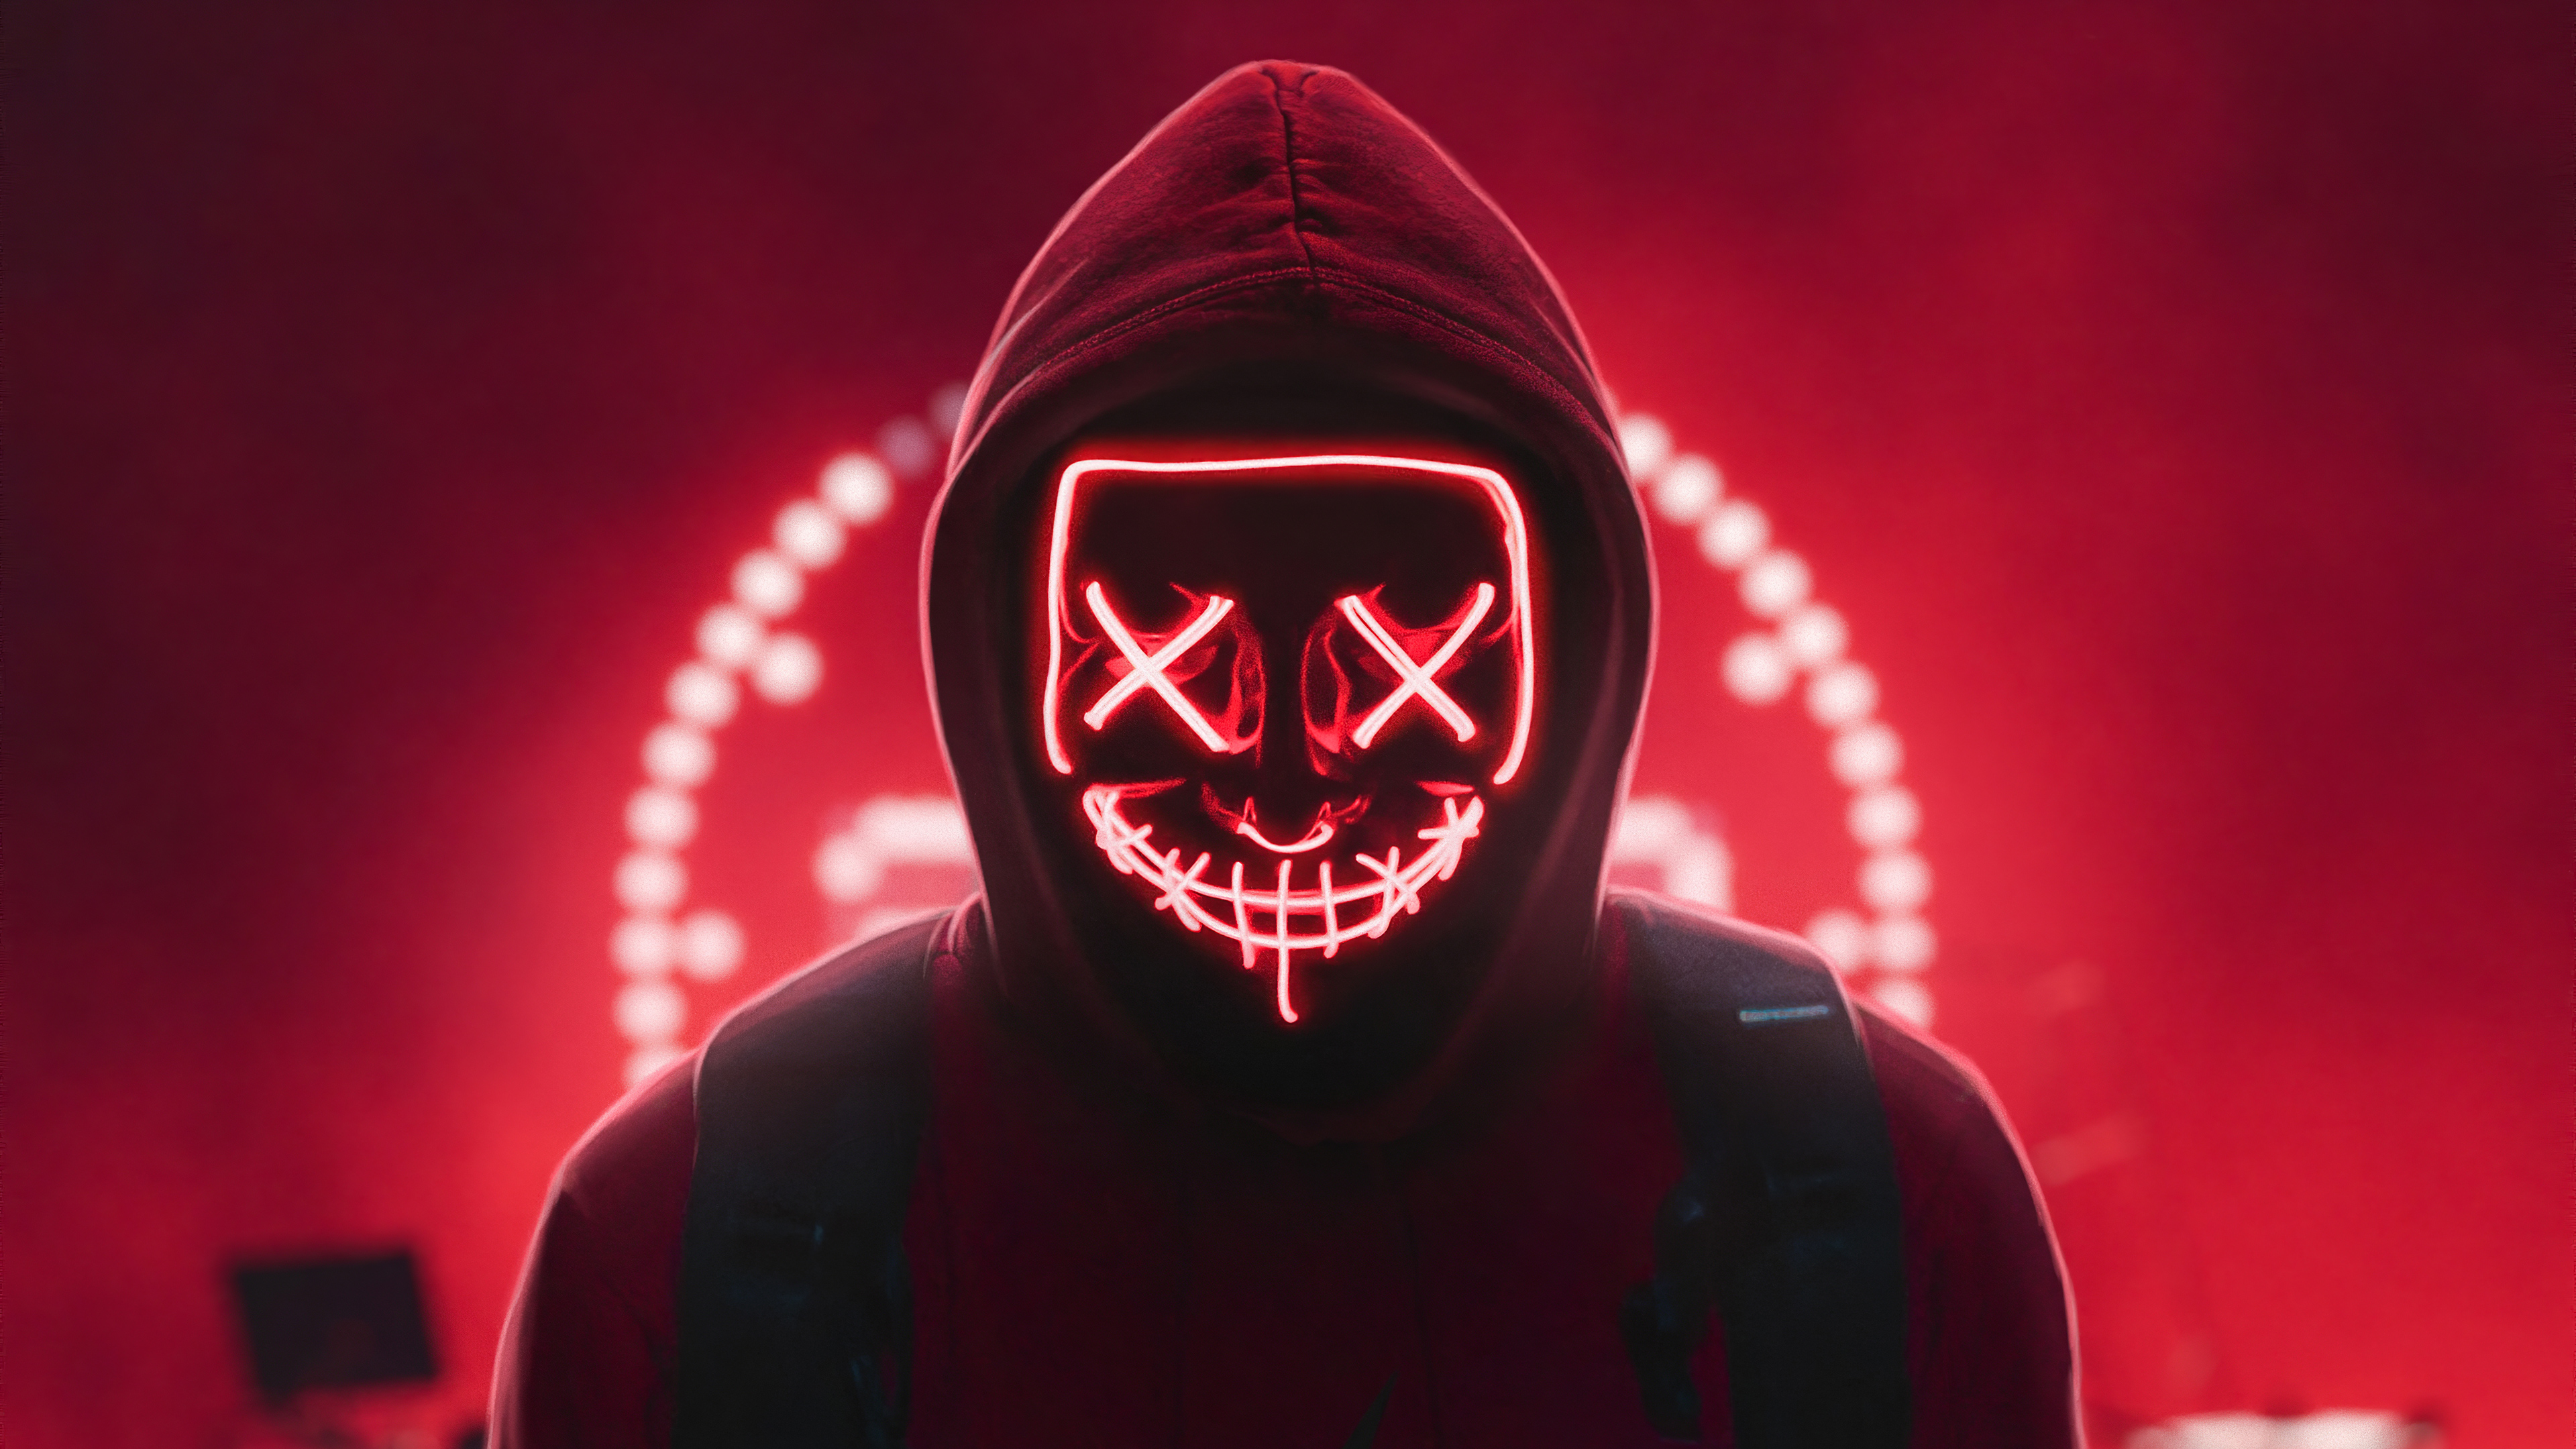 Neon Man 4k, HD Photography, 4k Wallpapers, Images ...